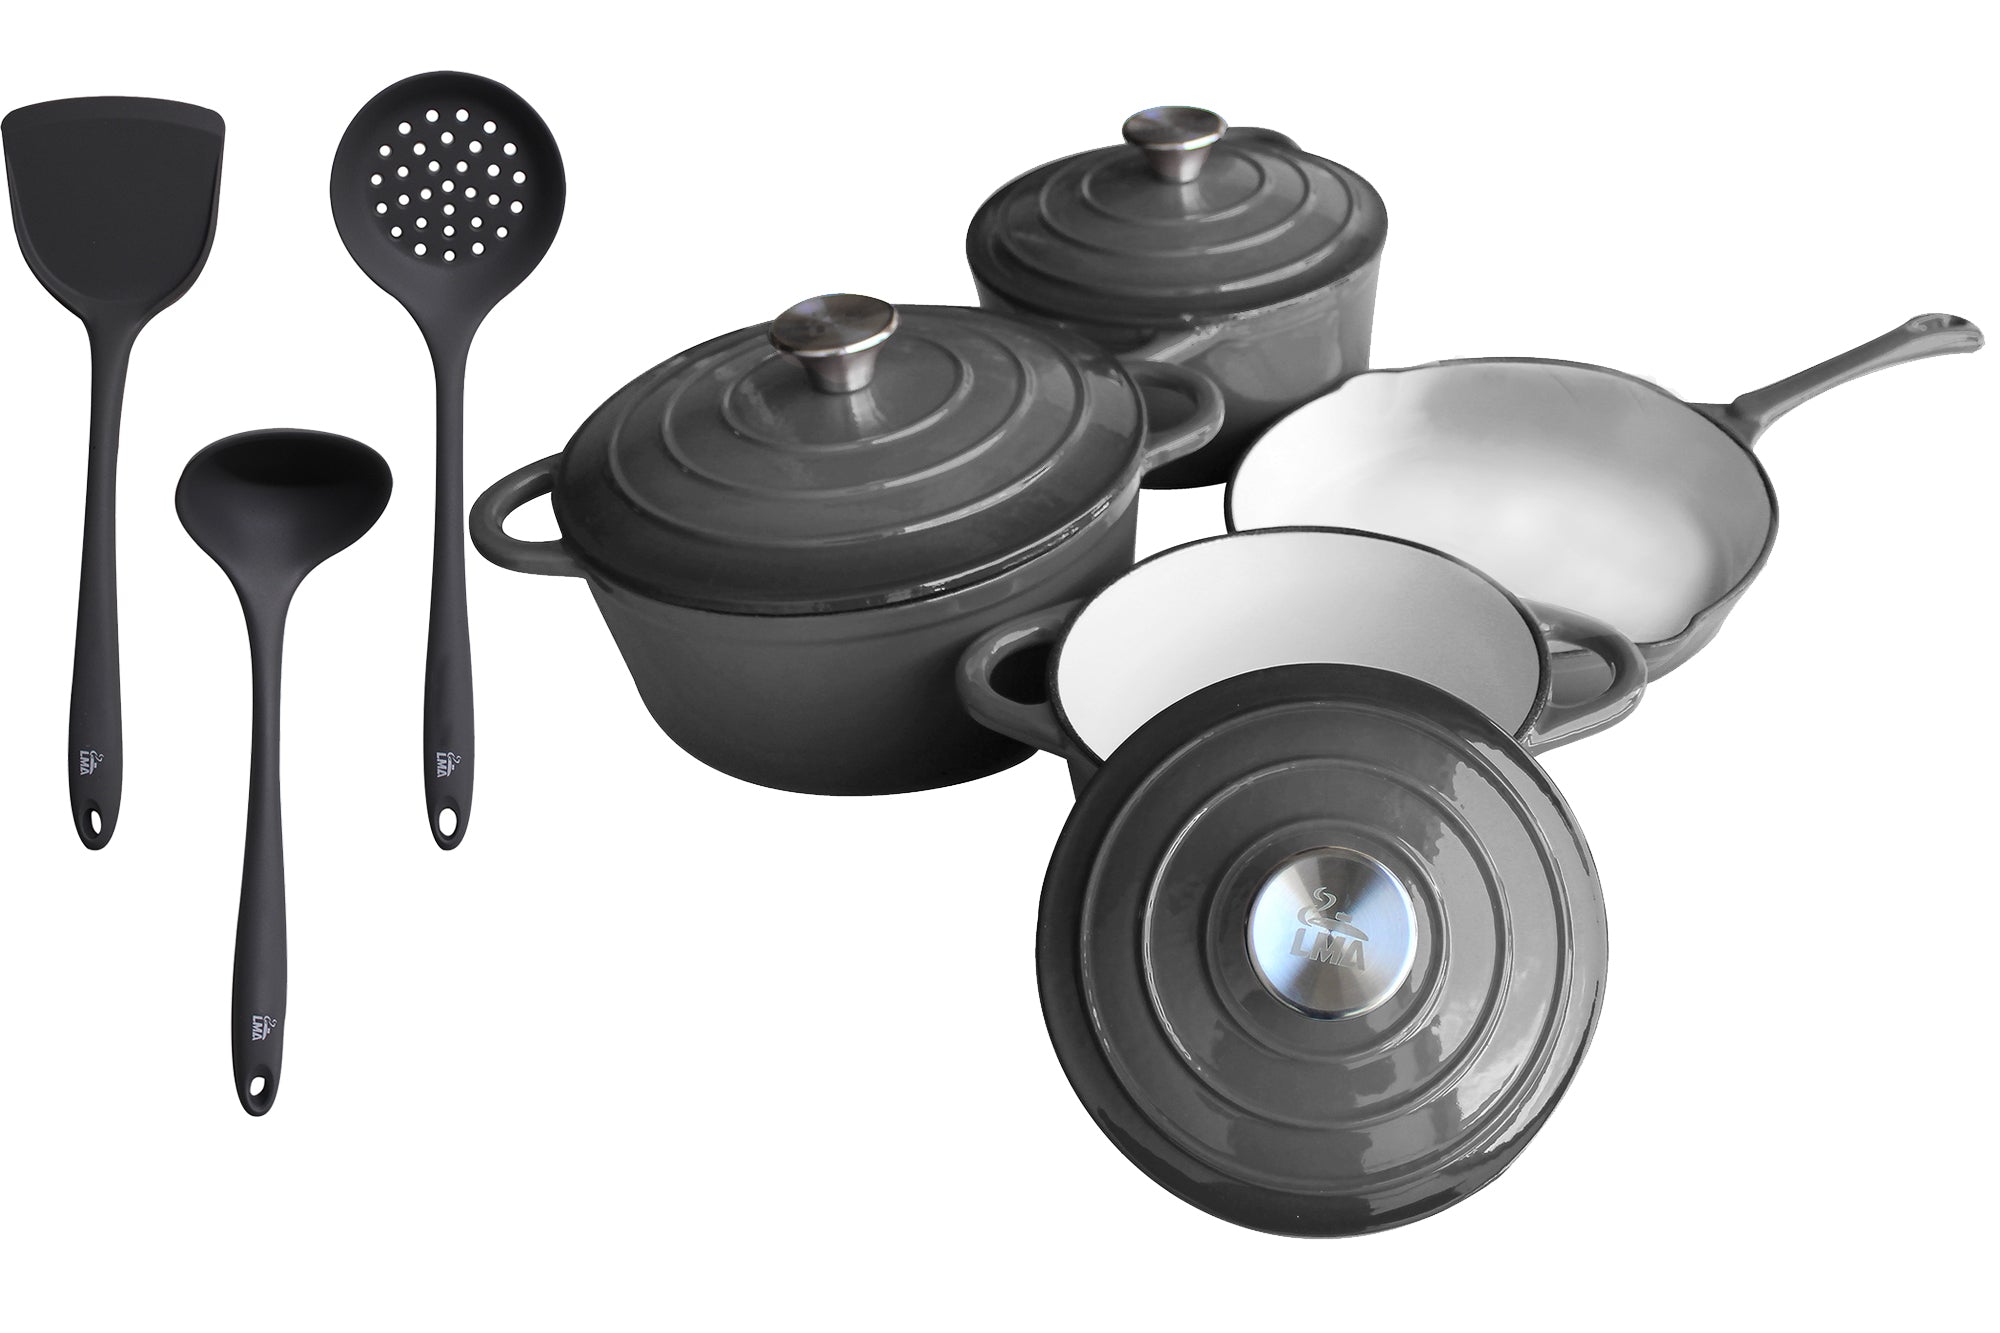 LMA Branded - 10 Piece Cast-Iron Cookware Pots & Silicone Kitchen Utensil Set